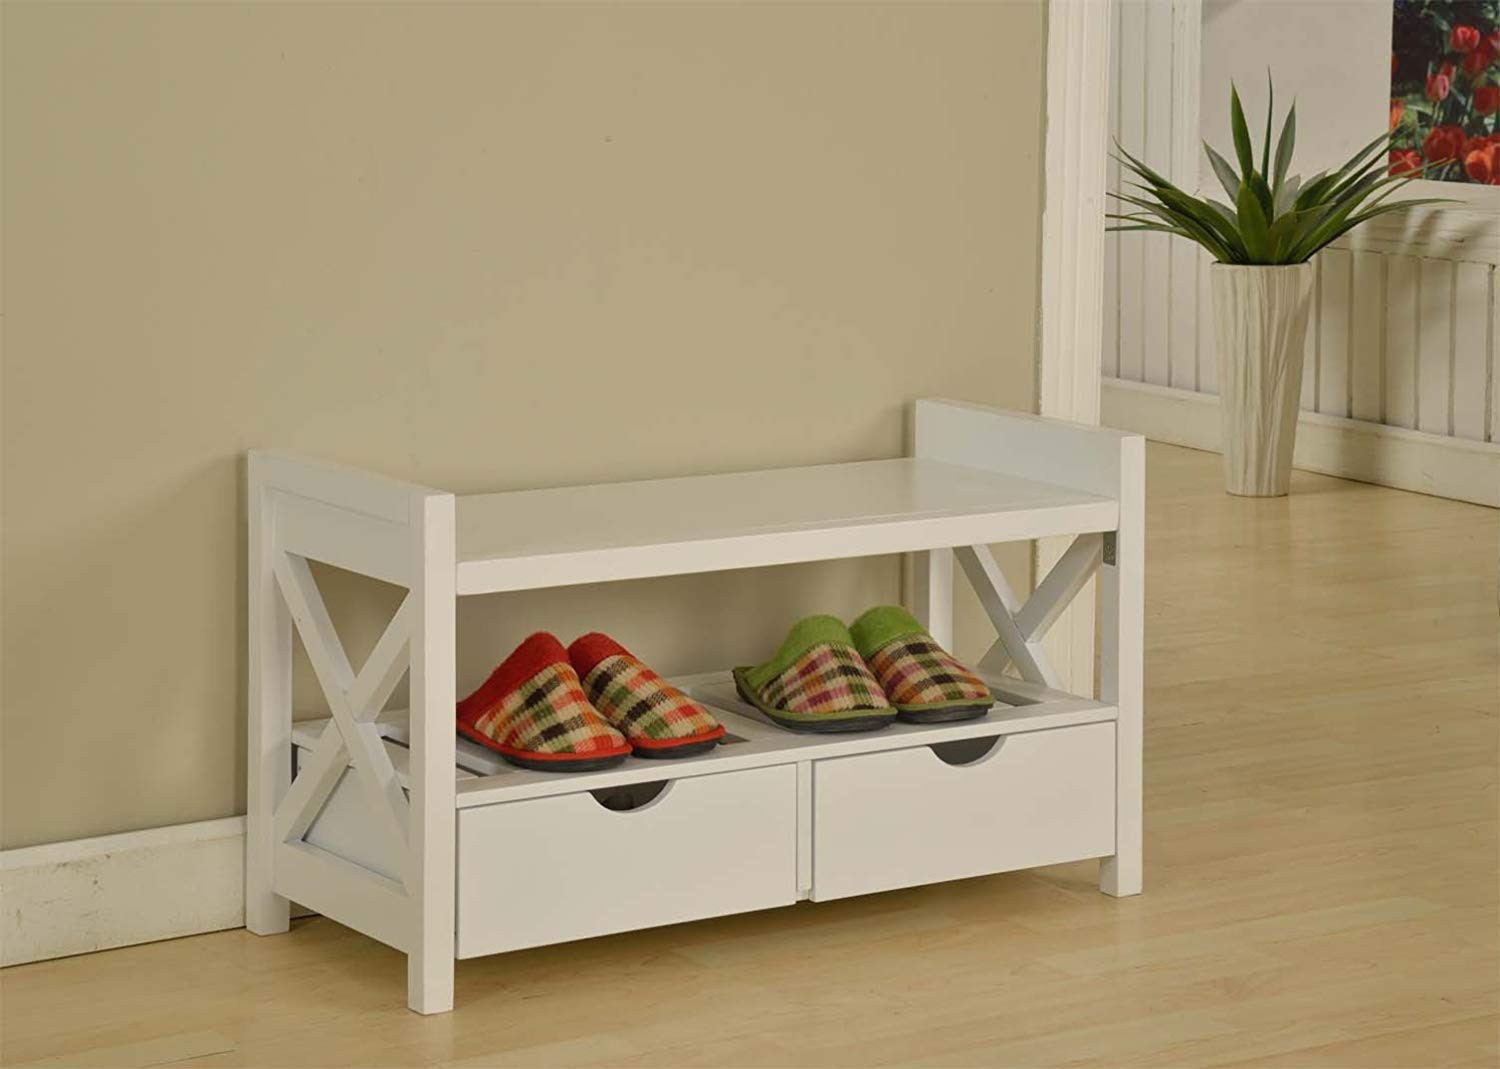 Bench With Shoe Storage
 Kings Brand White Finish Wood Shoe Storage Bench With